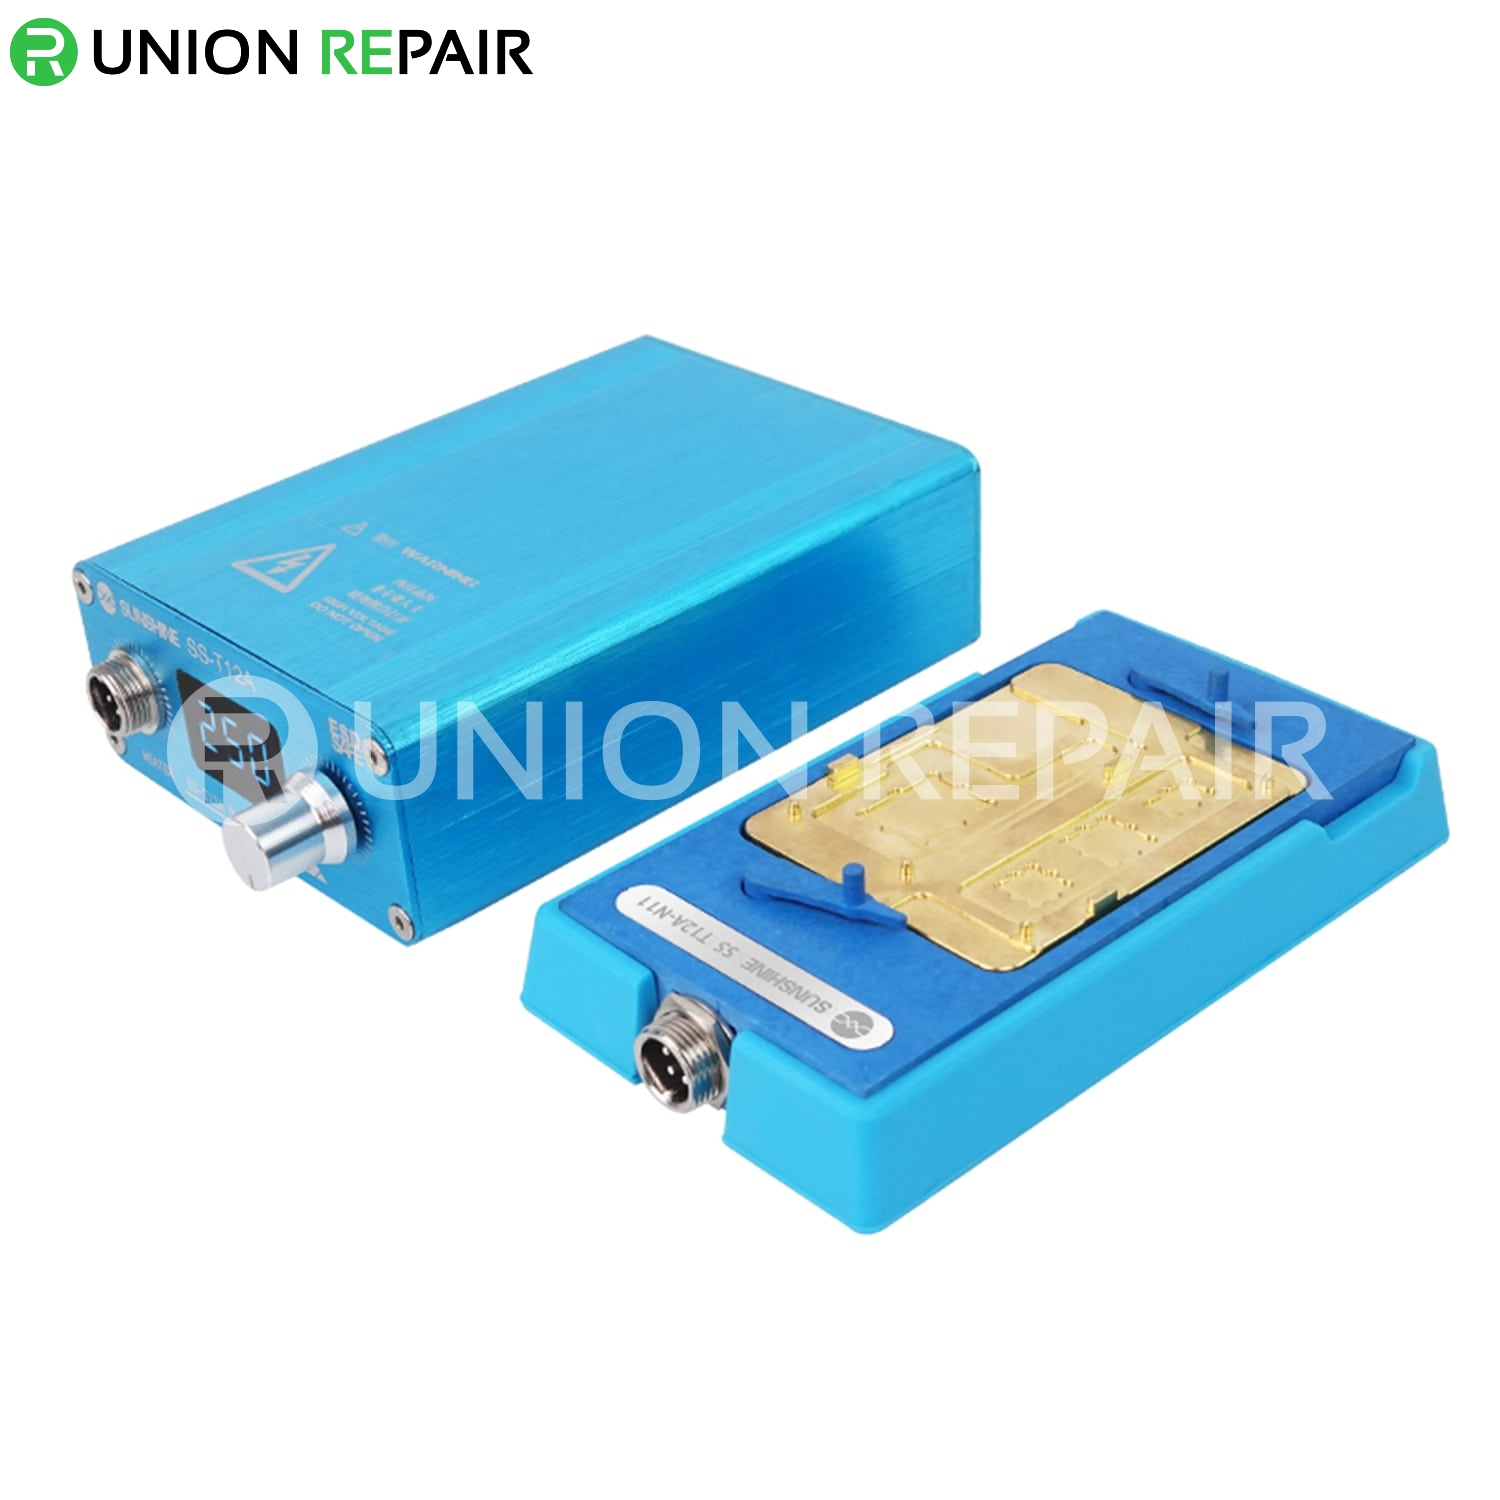 SS-T12A Mainboard Preheater for iPhone X/XS/XS Max, Condition: T12A-N11 Groove